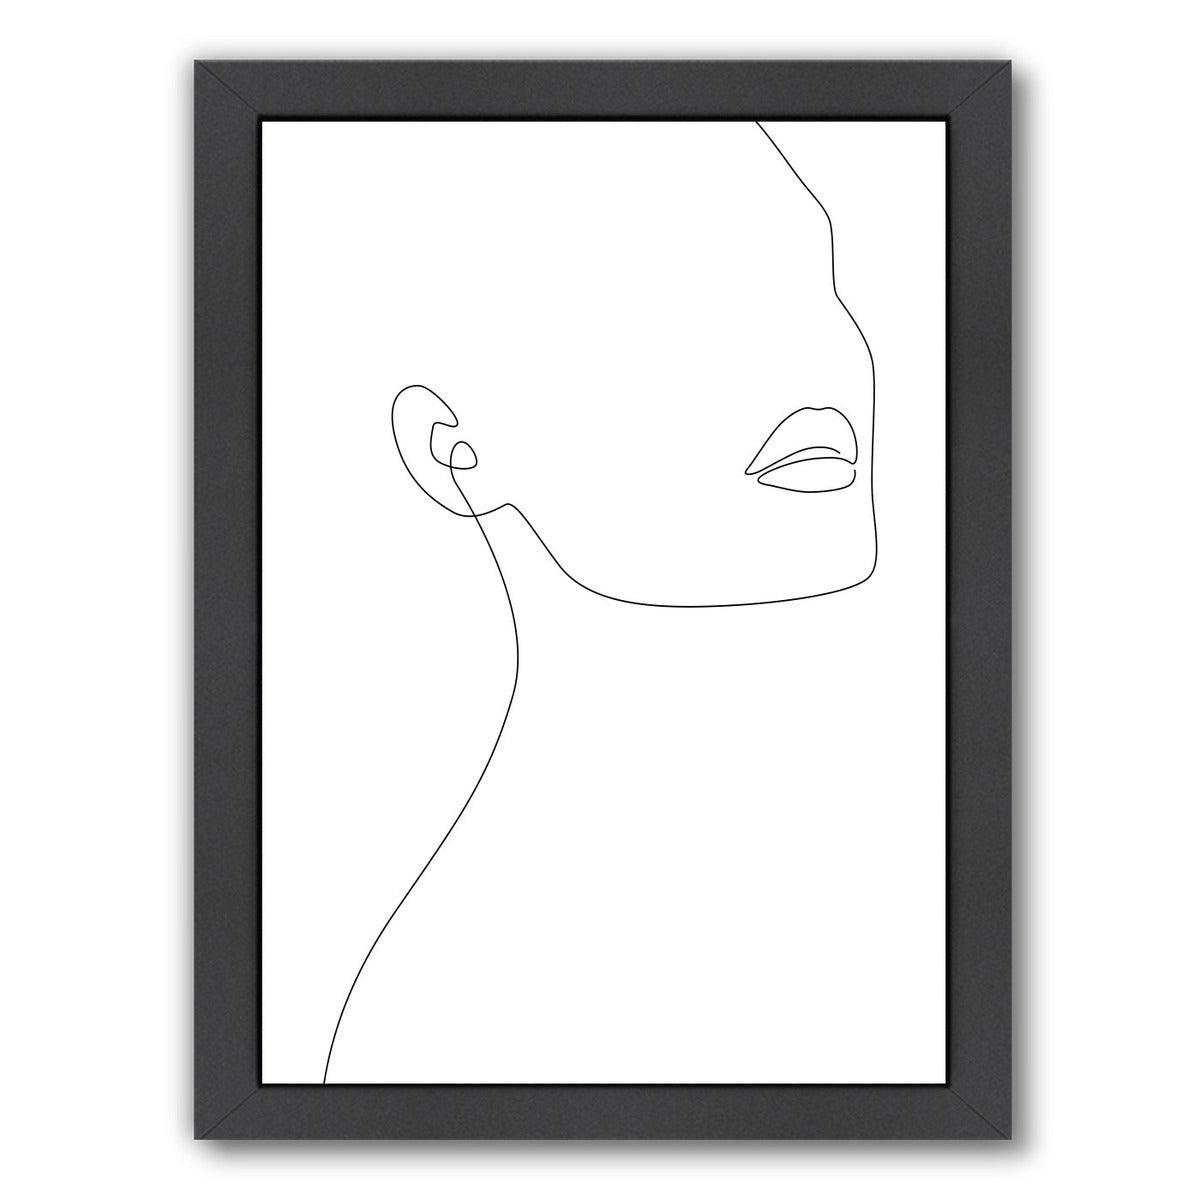 Simple Minimalist by Explicit Design Framed Print - Americanflat